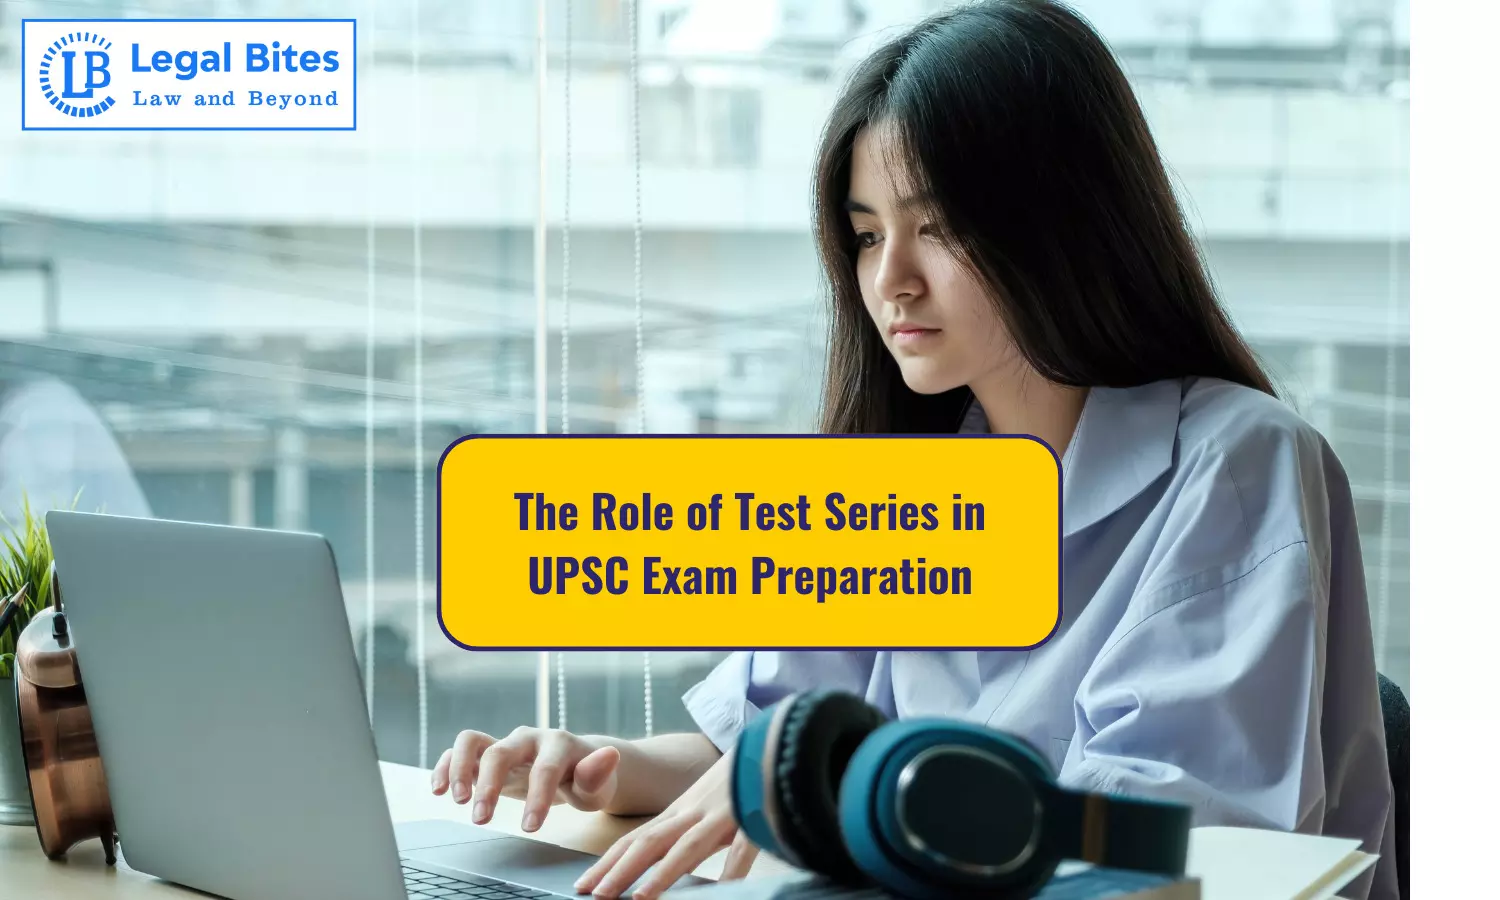 The Role of Test Series in UPSC Exam Preparation